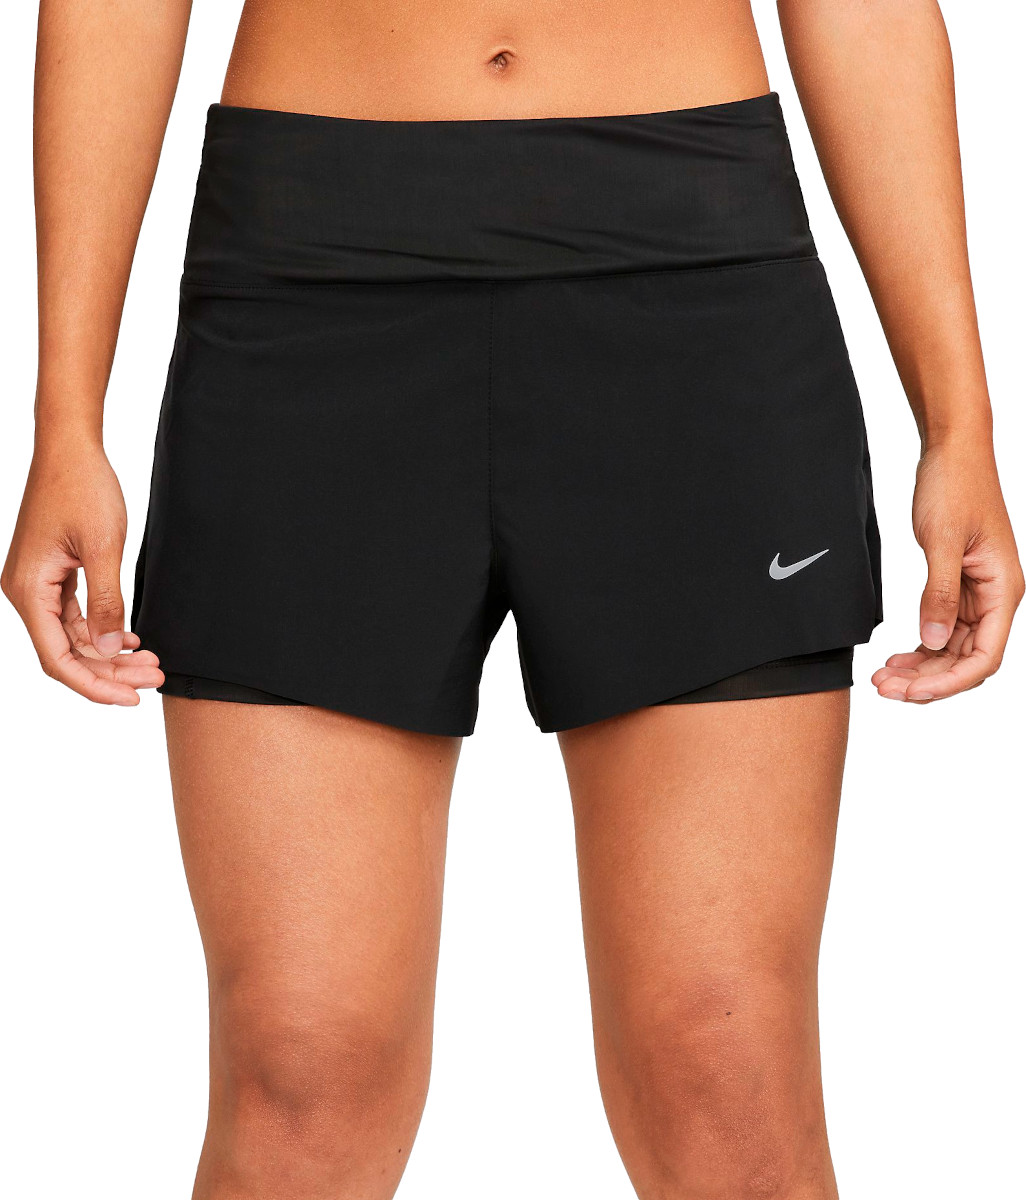 Nike Dri-FIT Swift Women s Mid-Rise 3 2-in-1 Running Shorts with Pockets